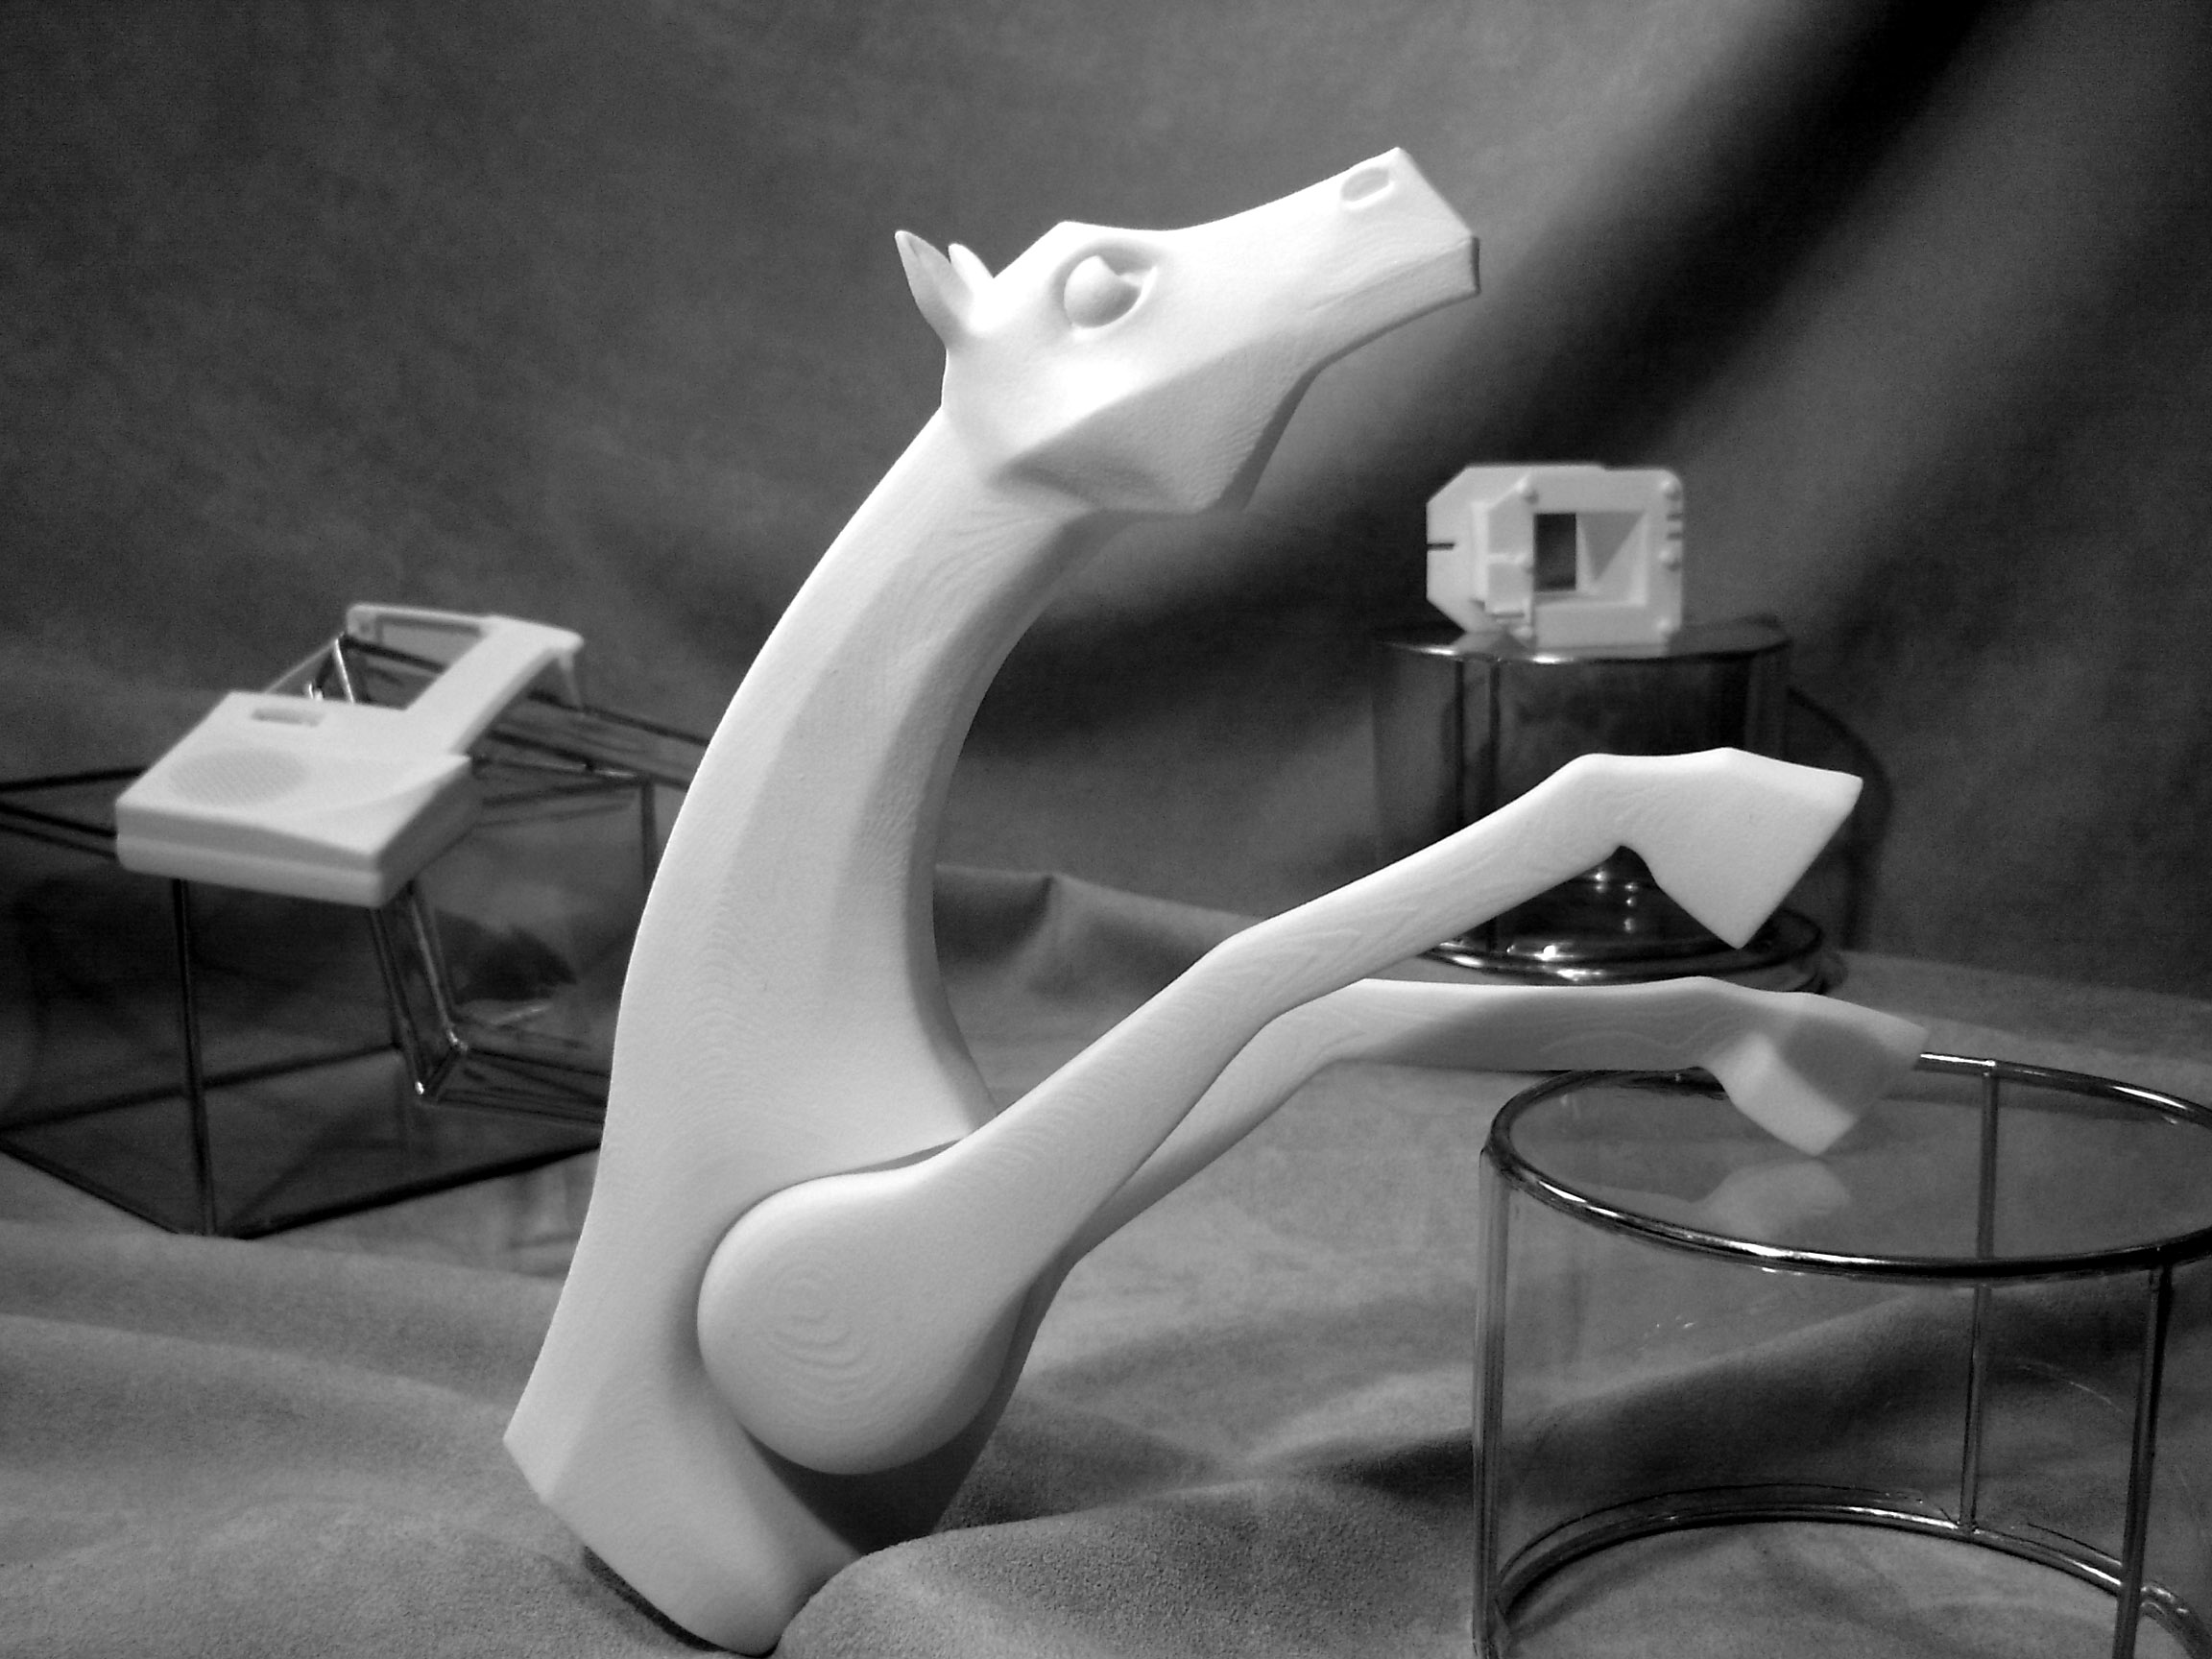 Rapid prototyping model of sculpted horse